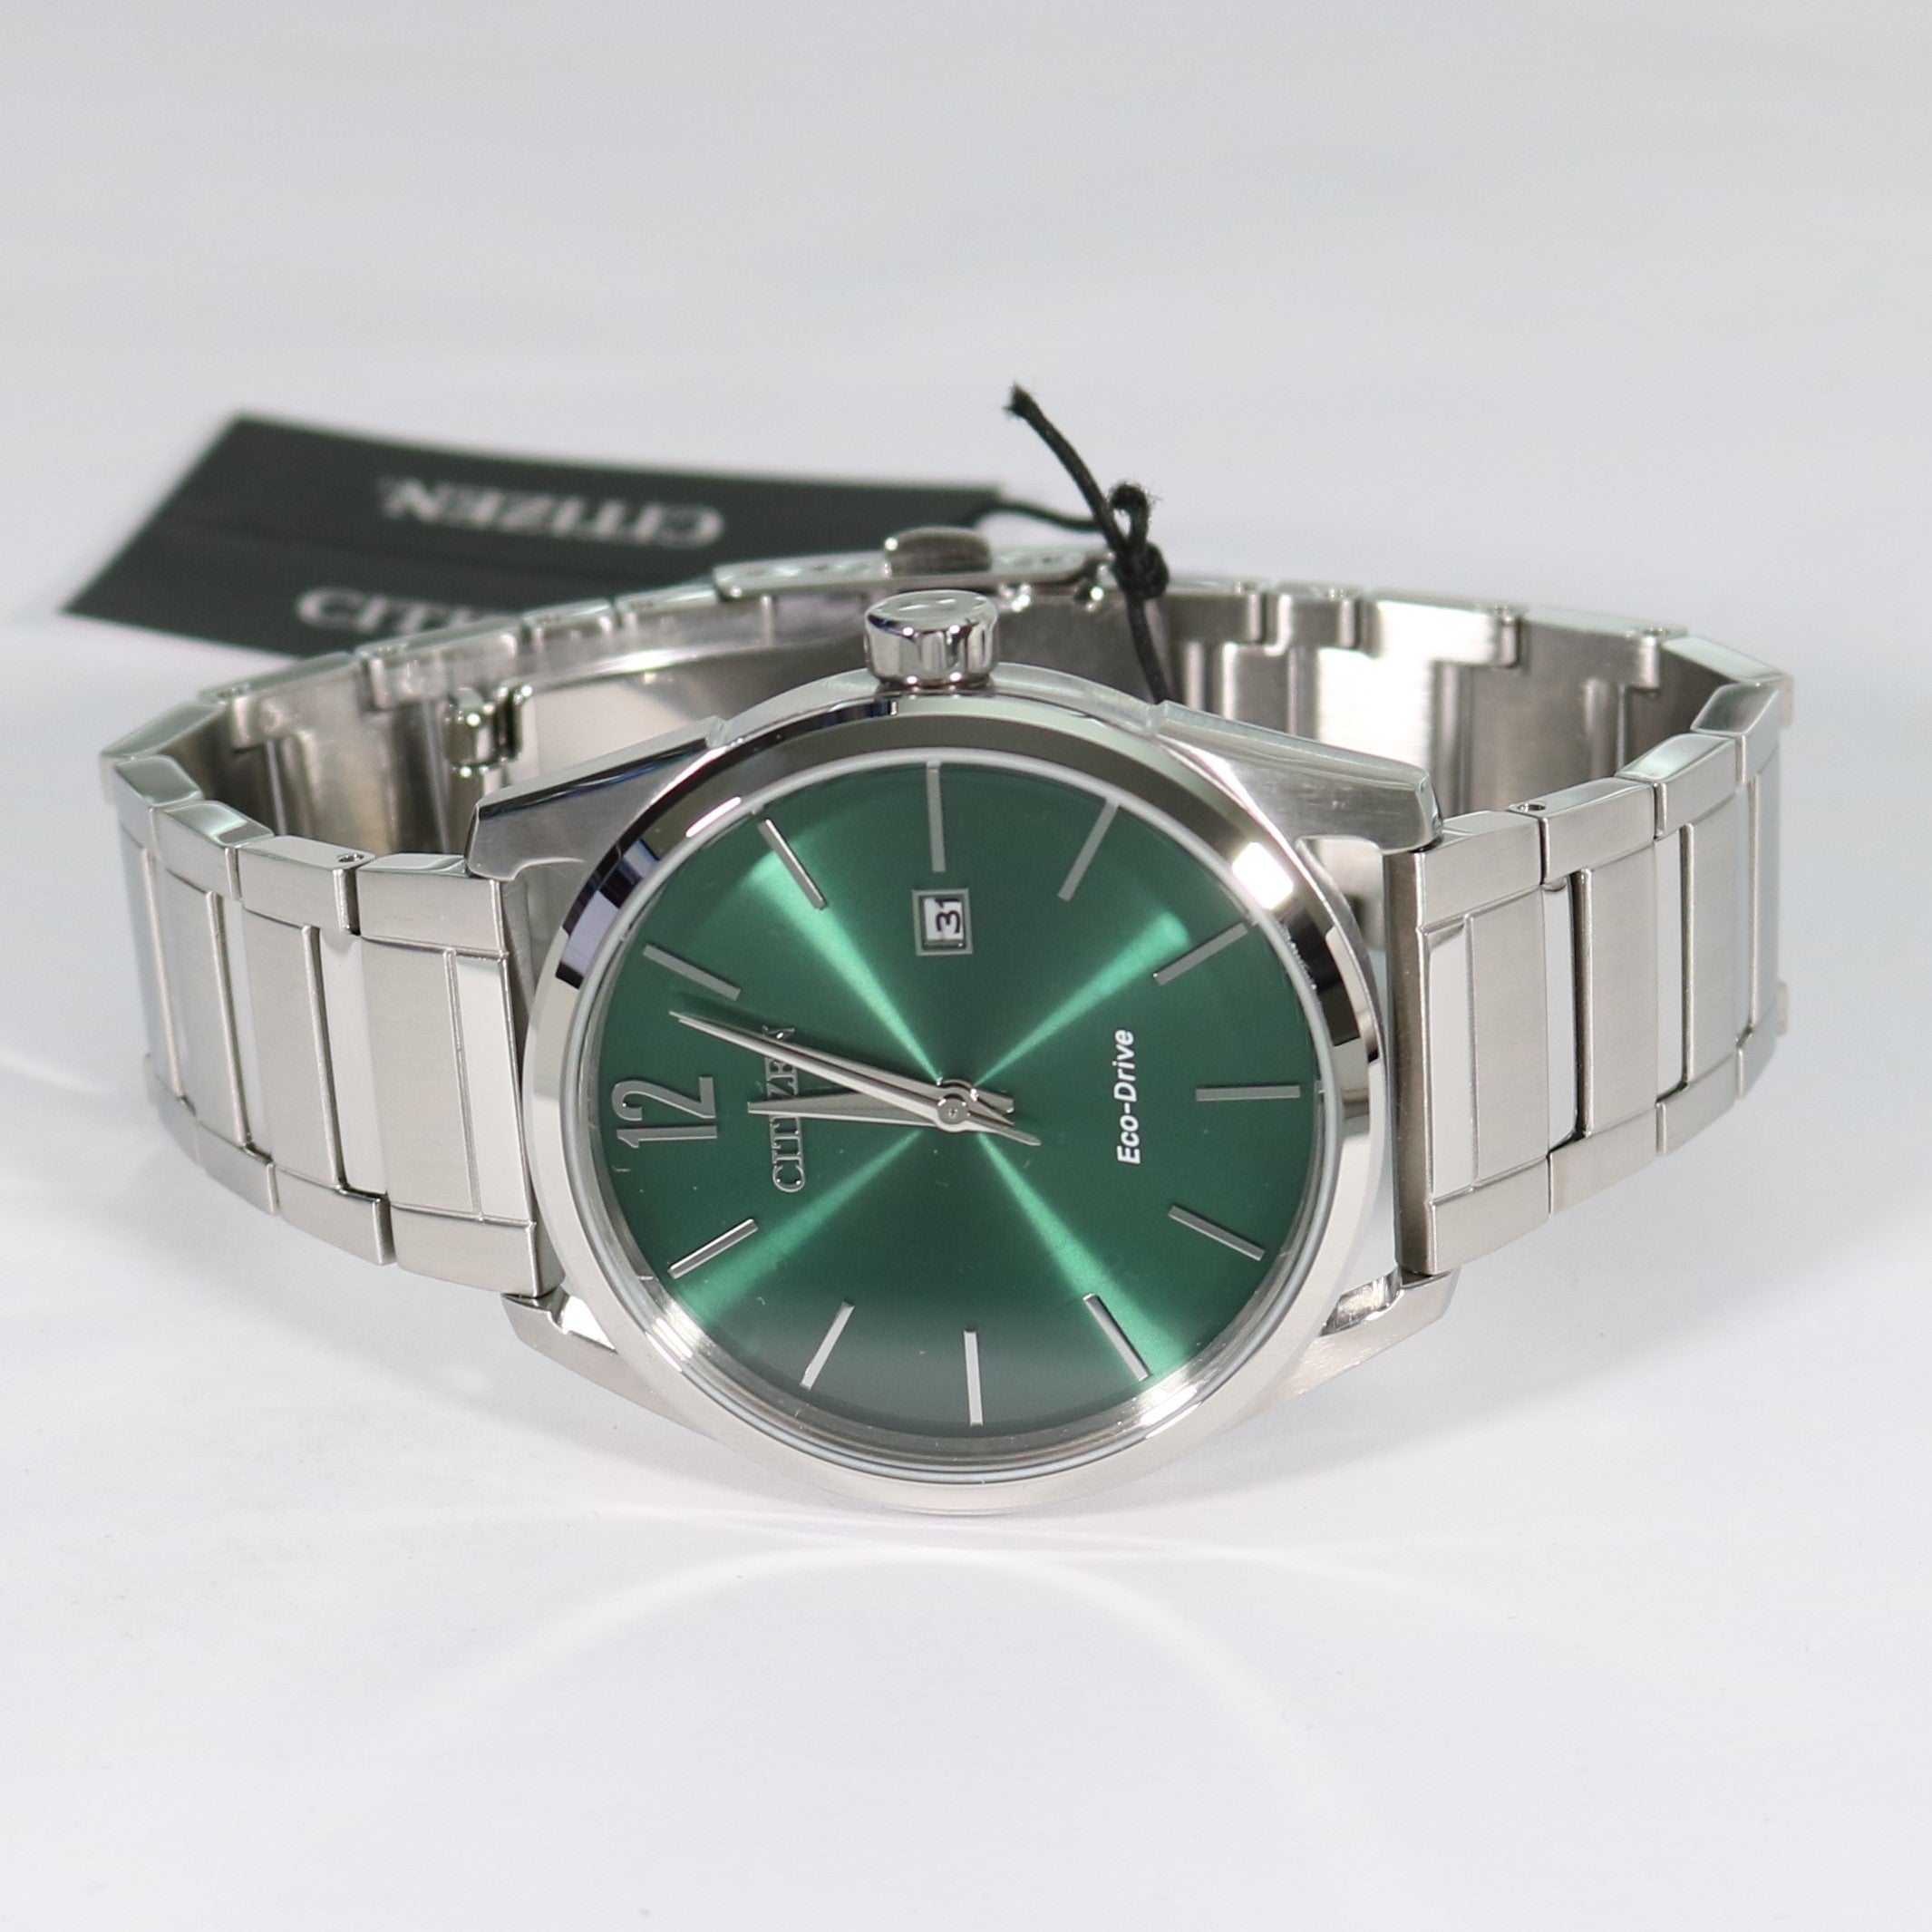 Citizen Eco-Drive Men's Green Dial Stainless Steel Watch BM7410